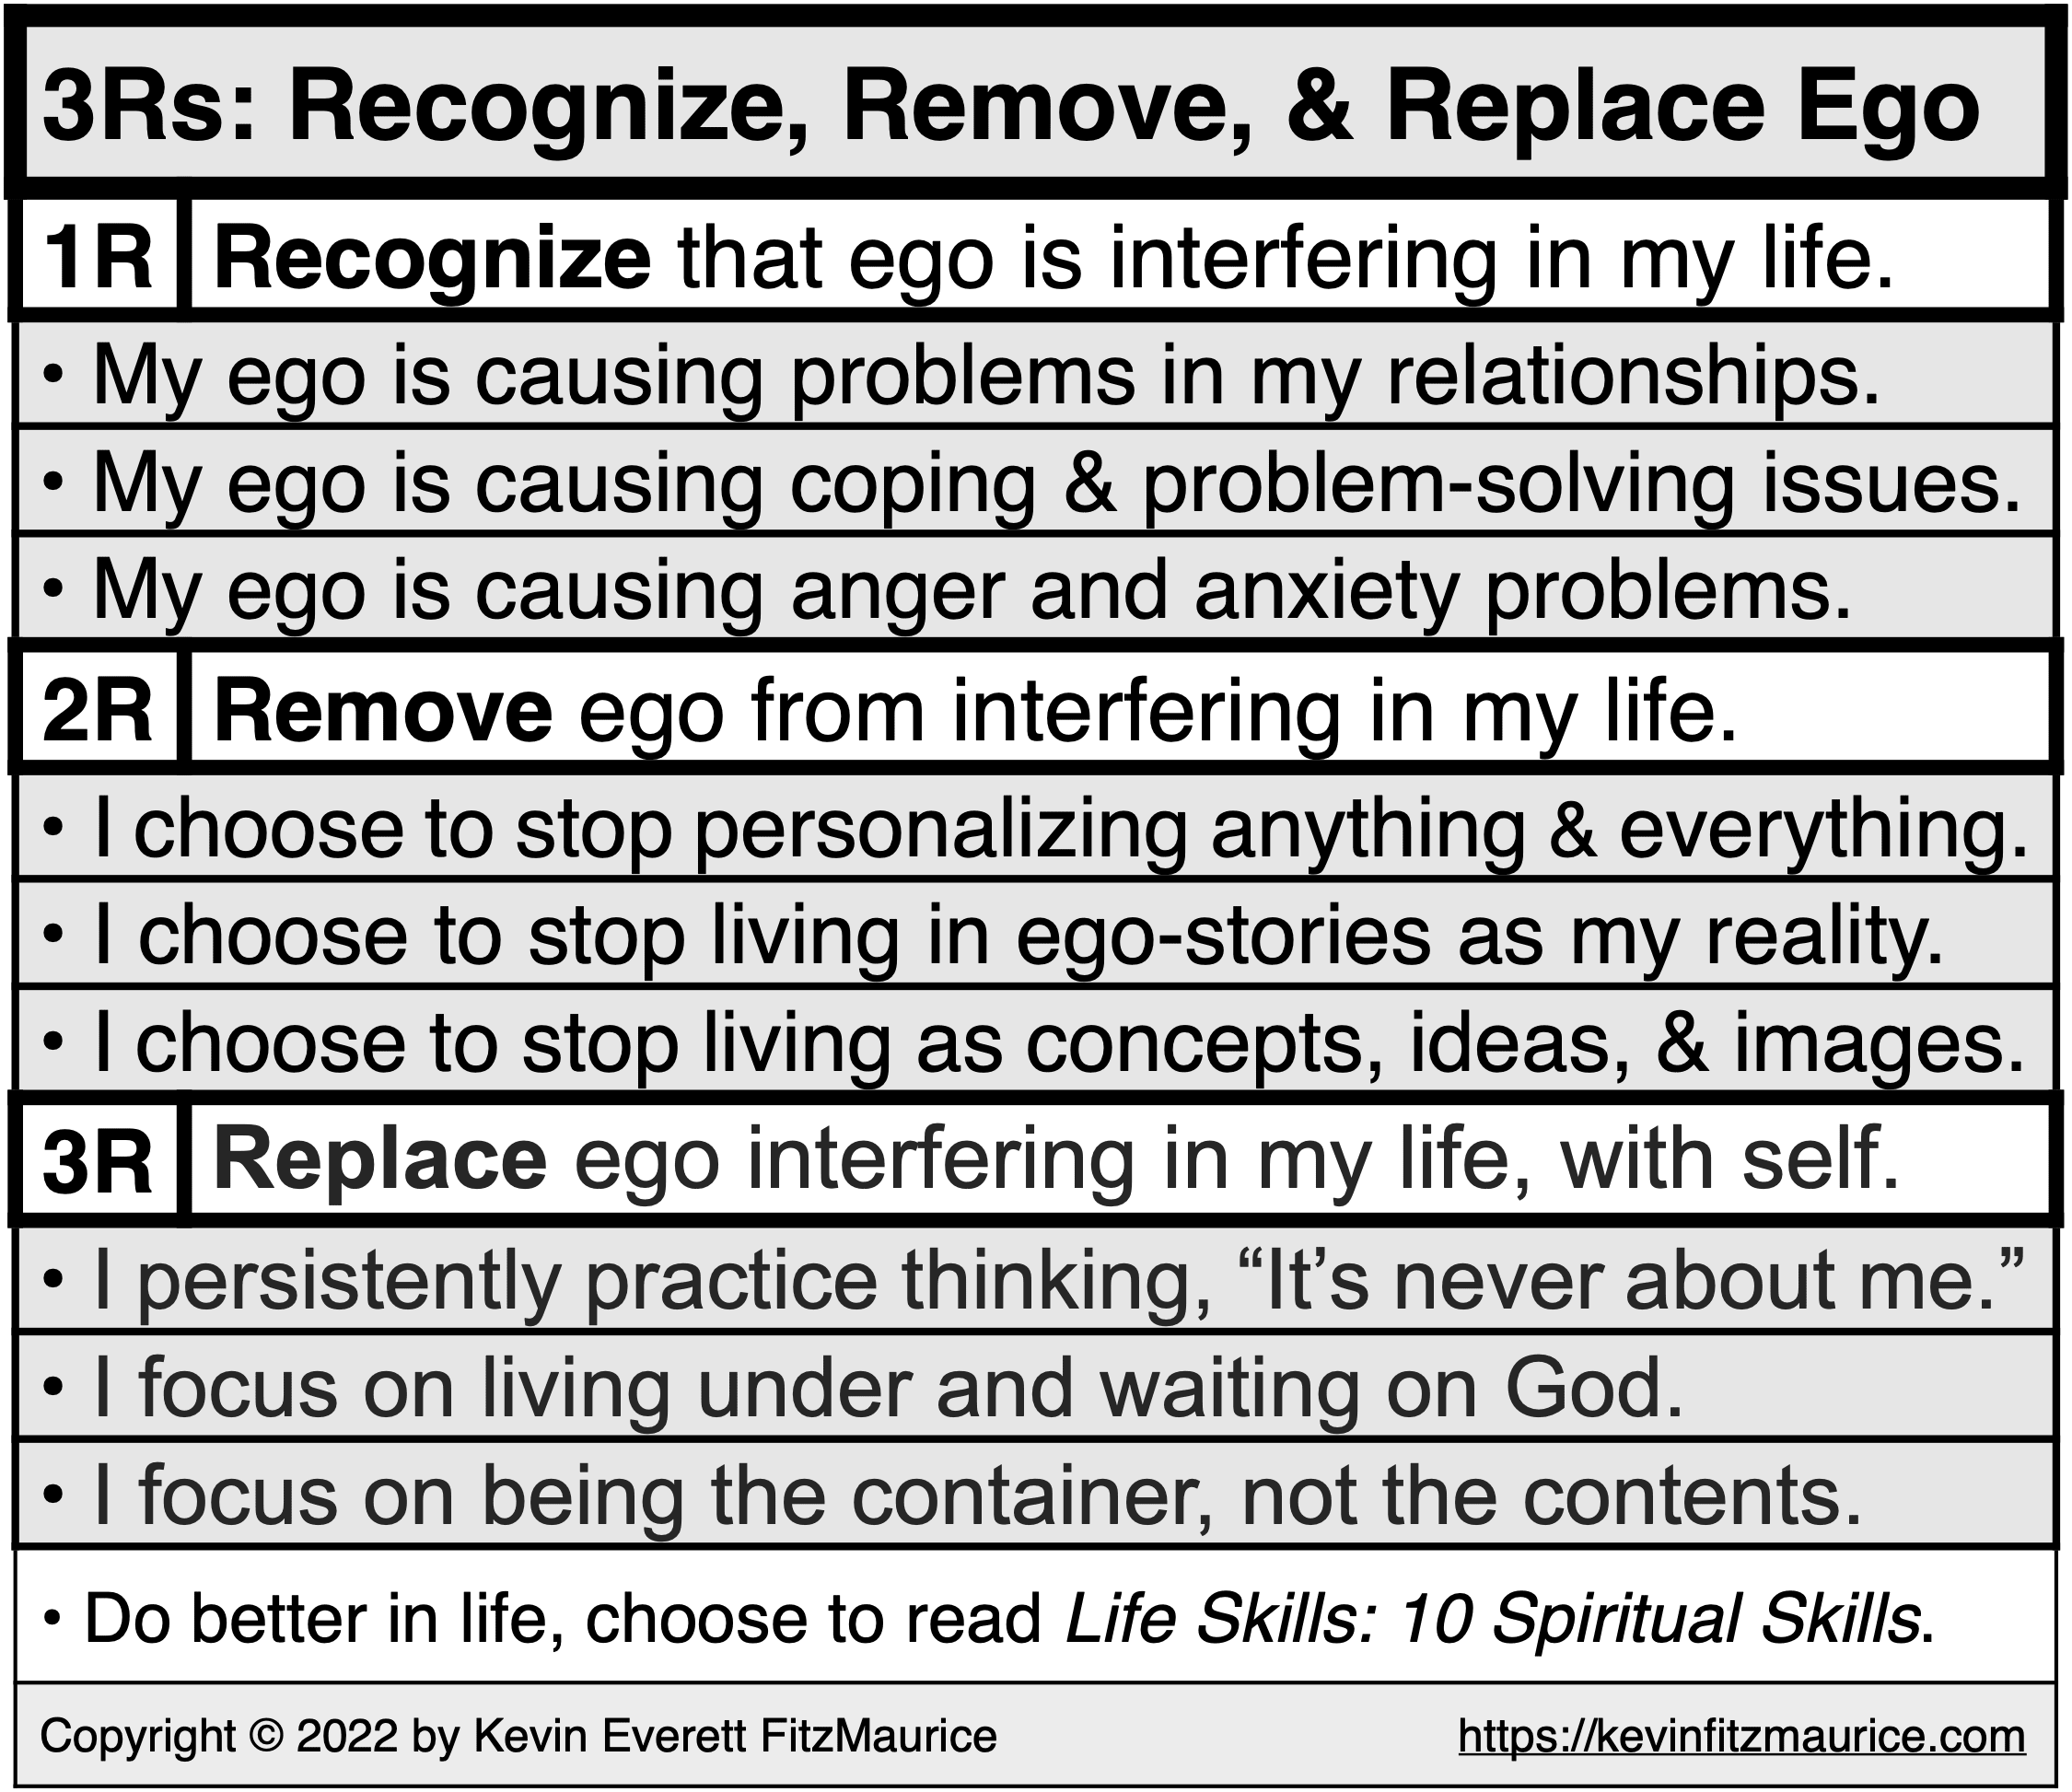 3Rs: Recognize, Remove, & Replace Ego